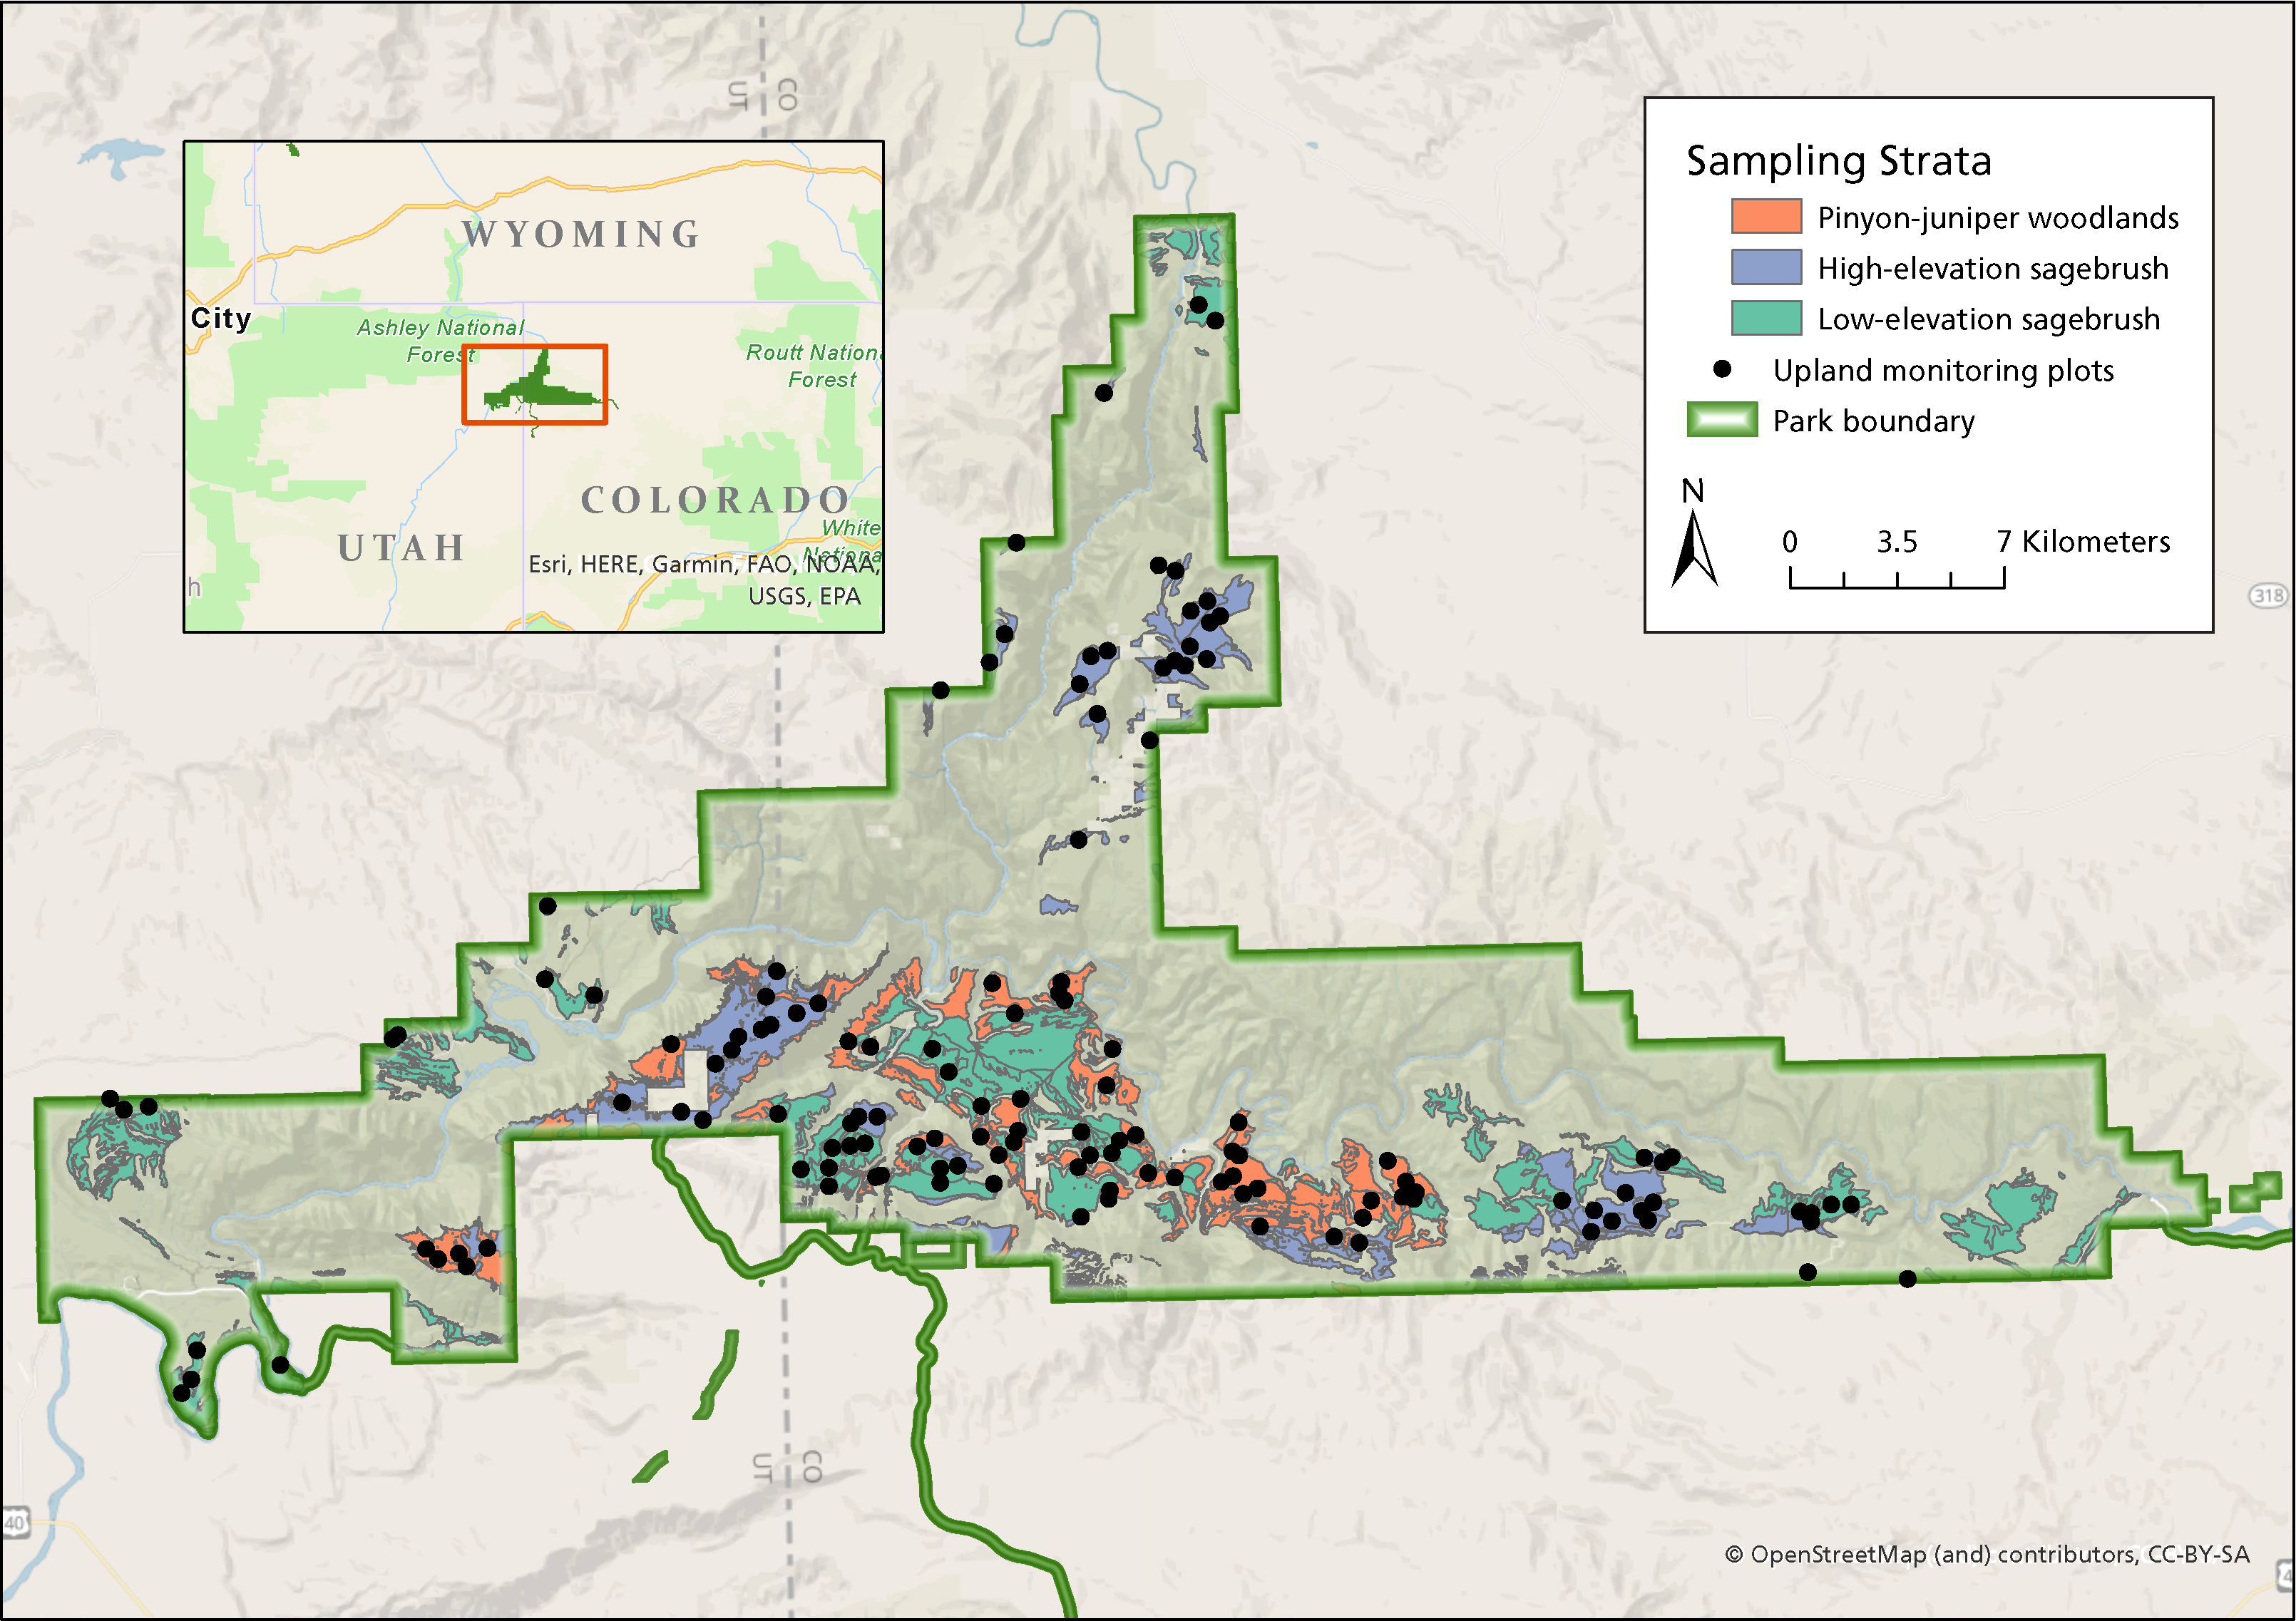  Monitoring plots and sampling strata shown on a map of Dinosaur National Monument. Sampling strata includes pinyon-juniper woodlands, and high-elevation and low-elevation sagebrush communities with plots indicated.